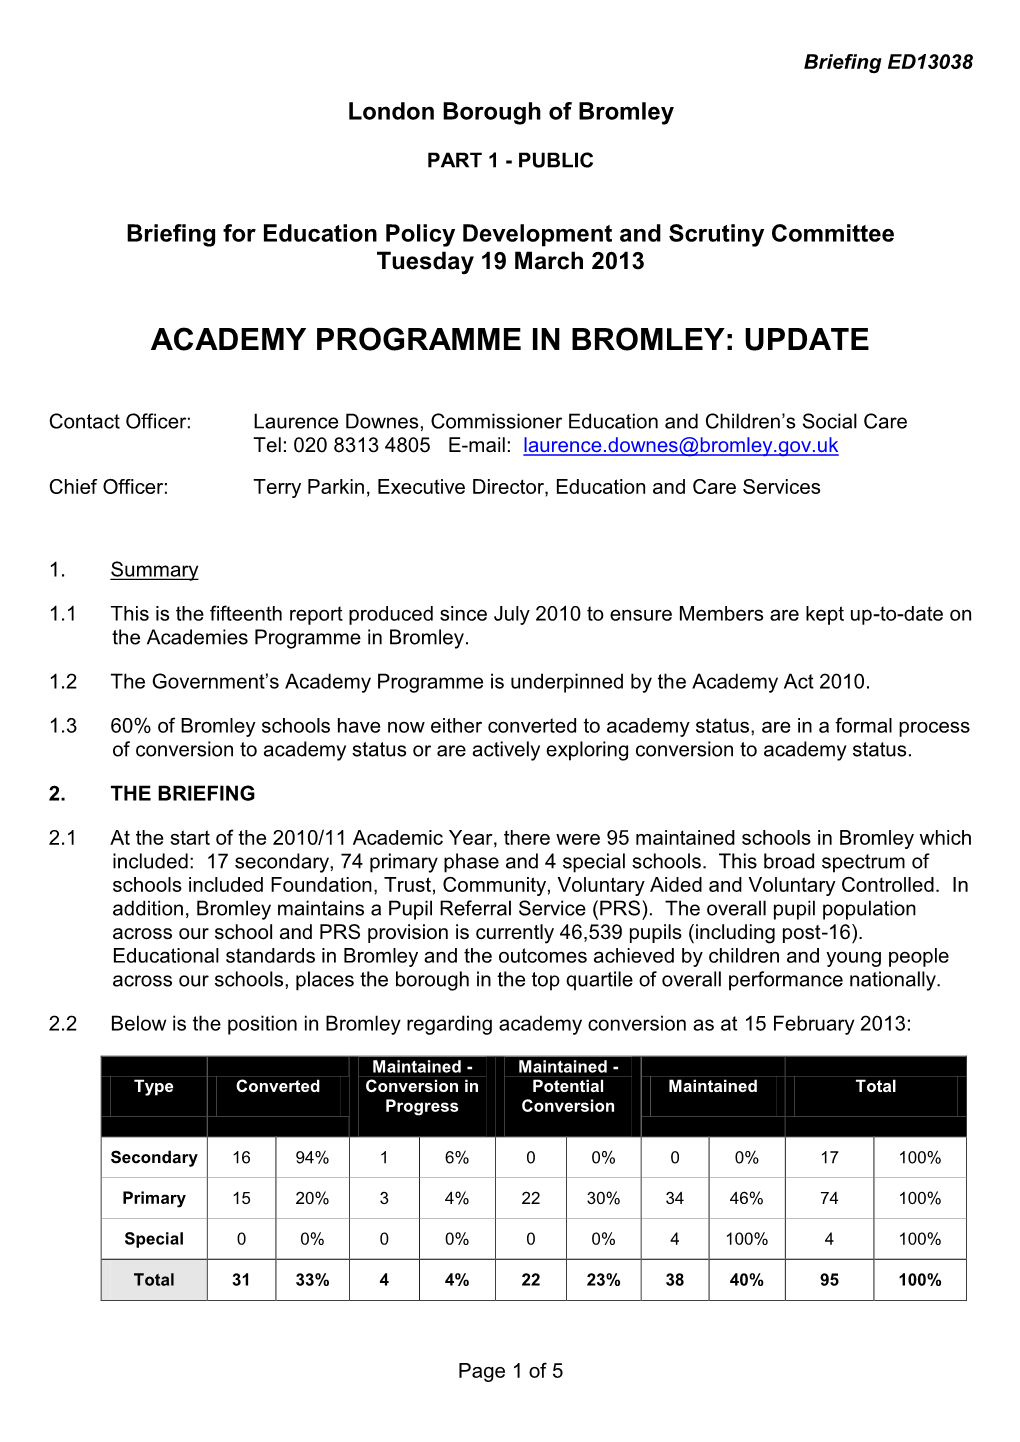 ED13038 Academy Programme in Bromley